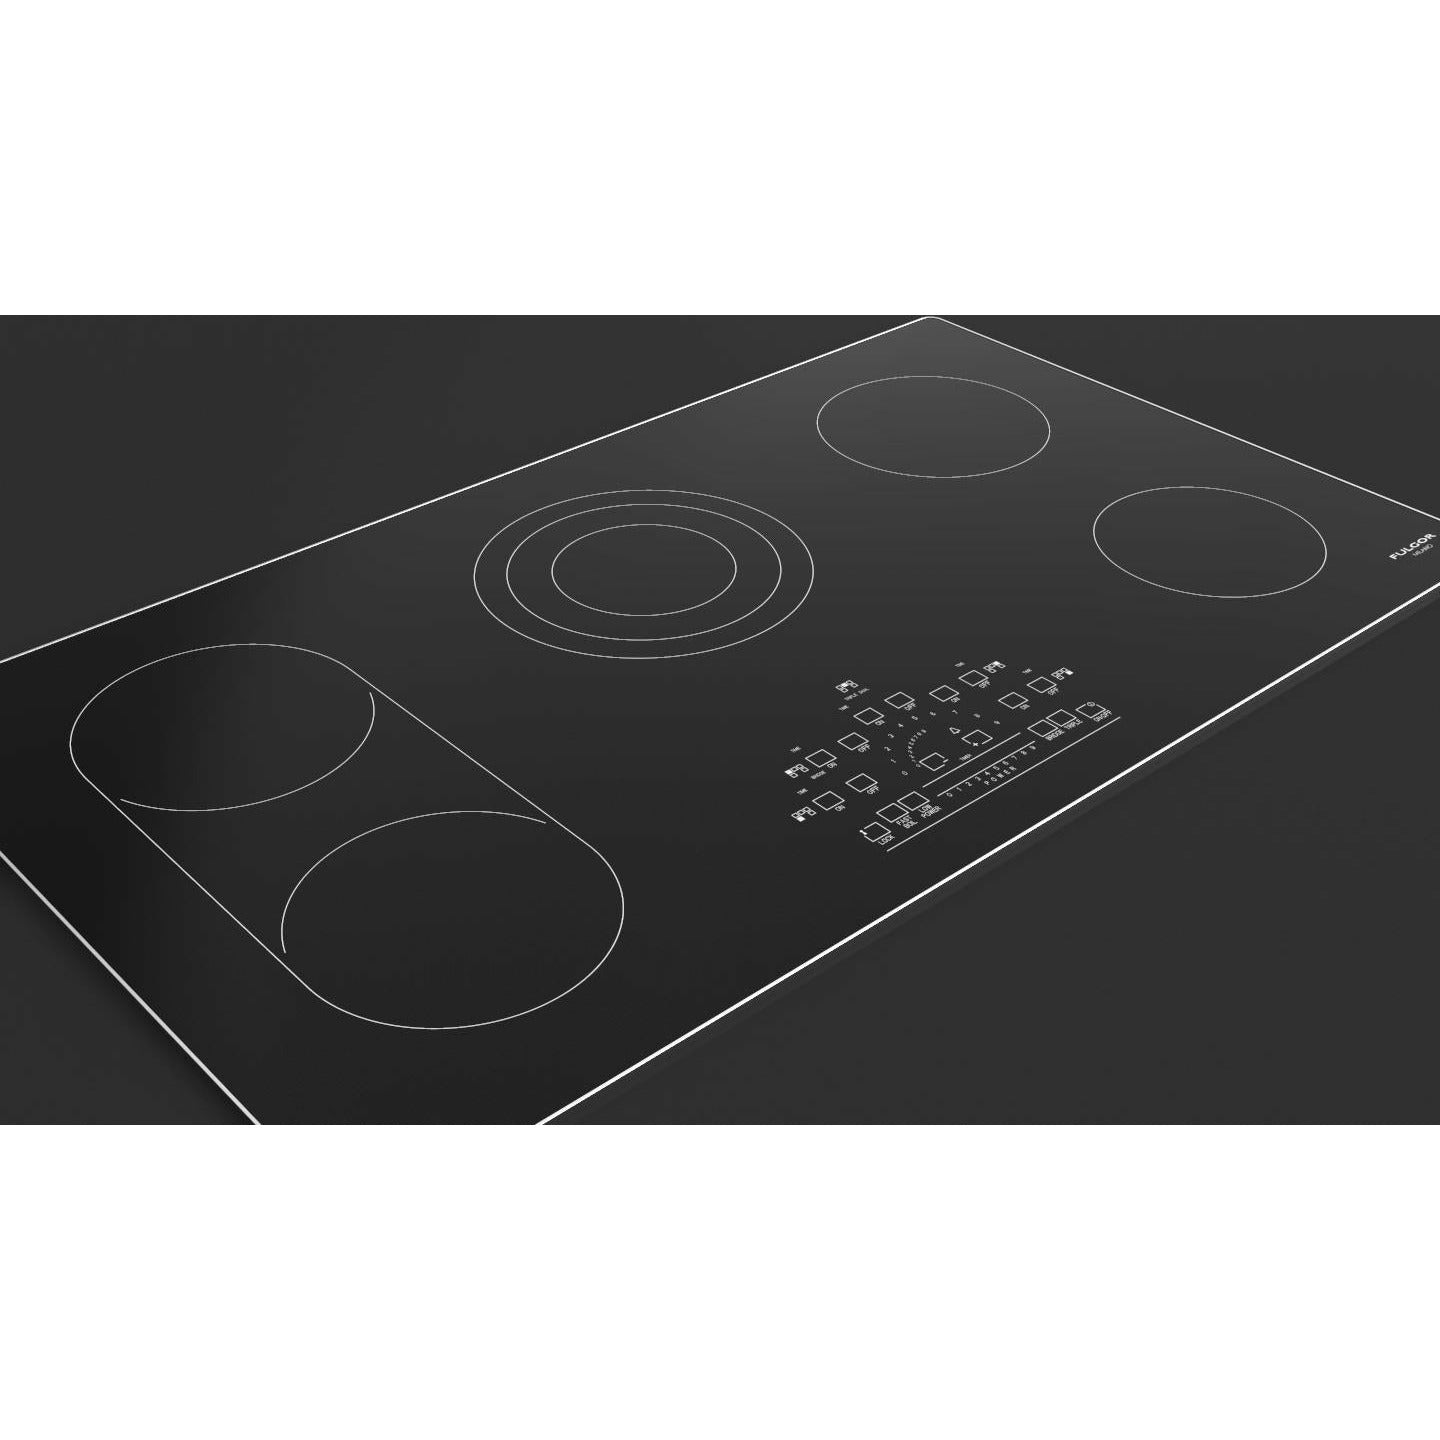 Fulgor Milano 36" Touch Radiant Electric Cooktop with 5 Elements, Glass Ceramic Surface - F6RT36S2 Cooktops F6RT36S2 Luxury Appliances Direct